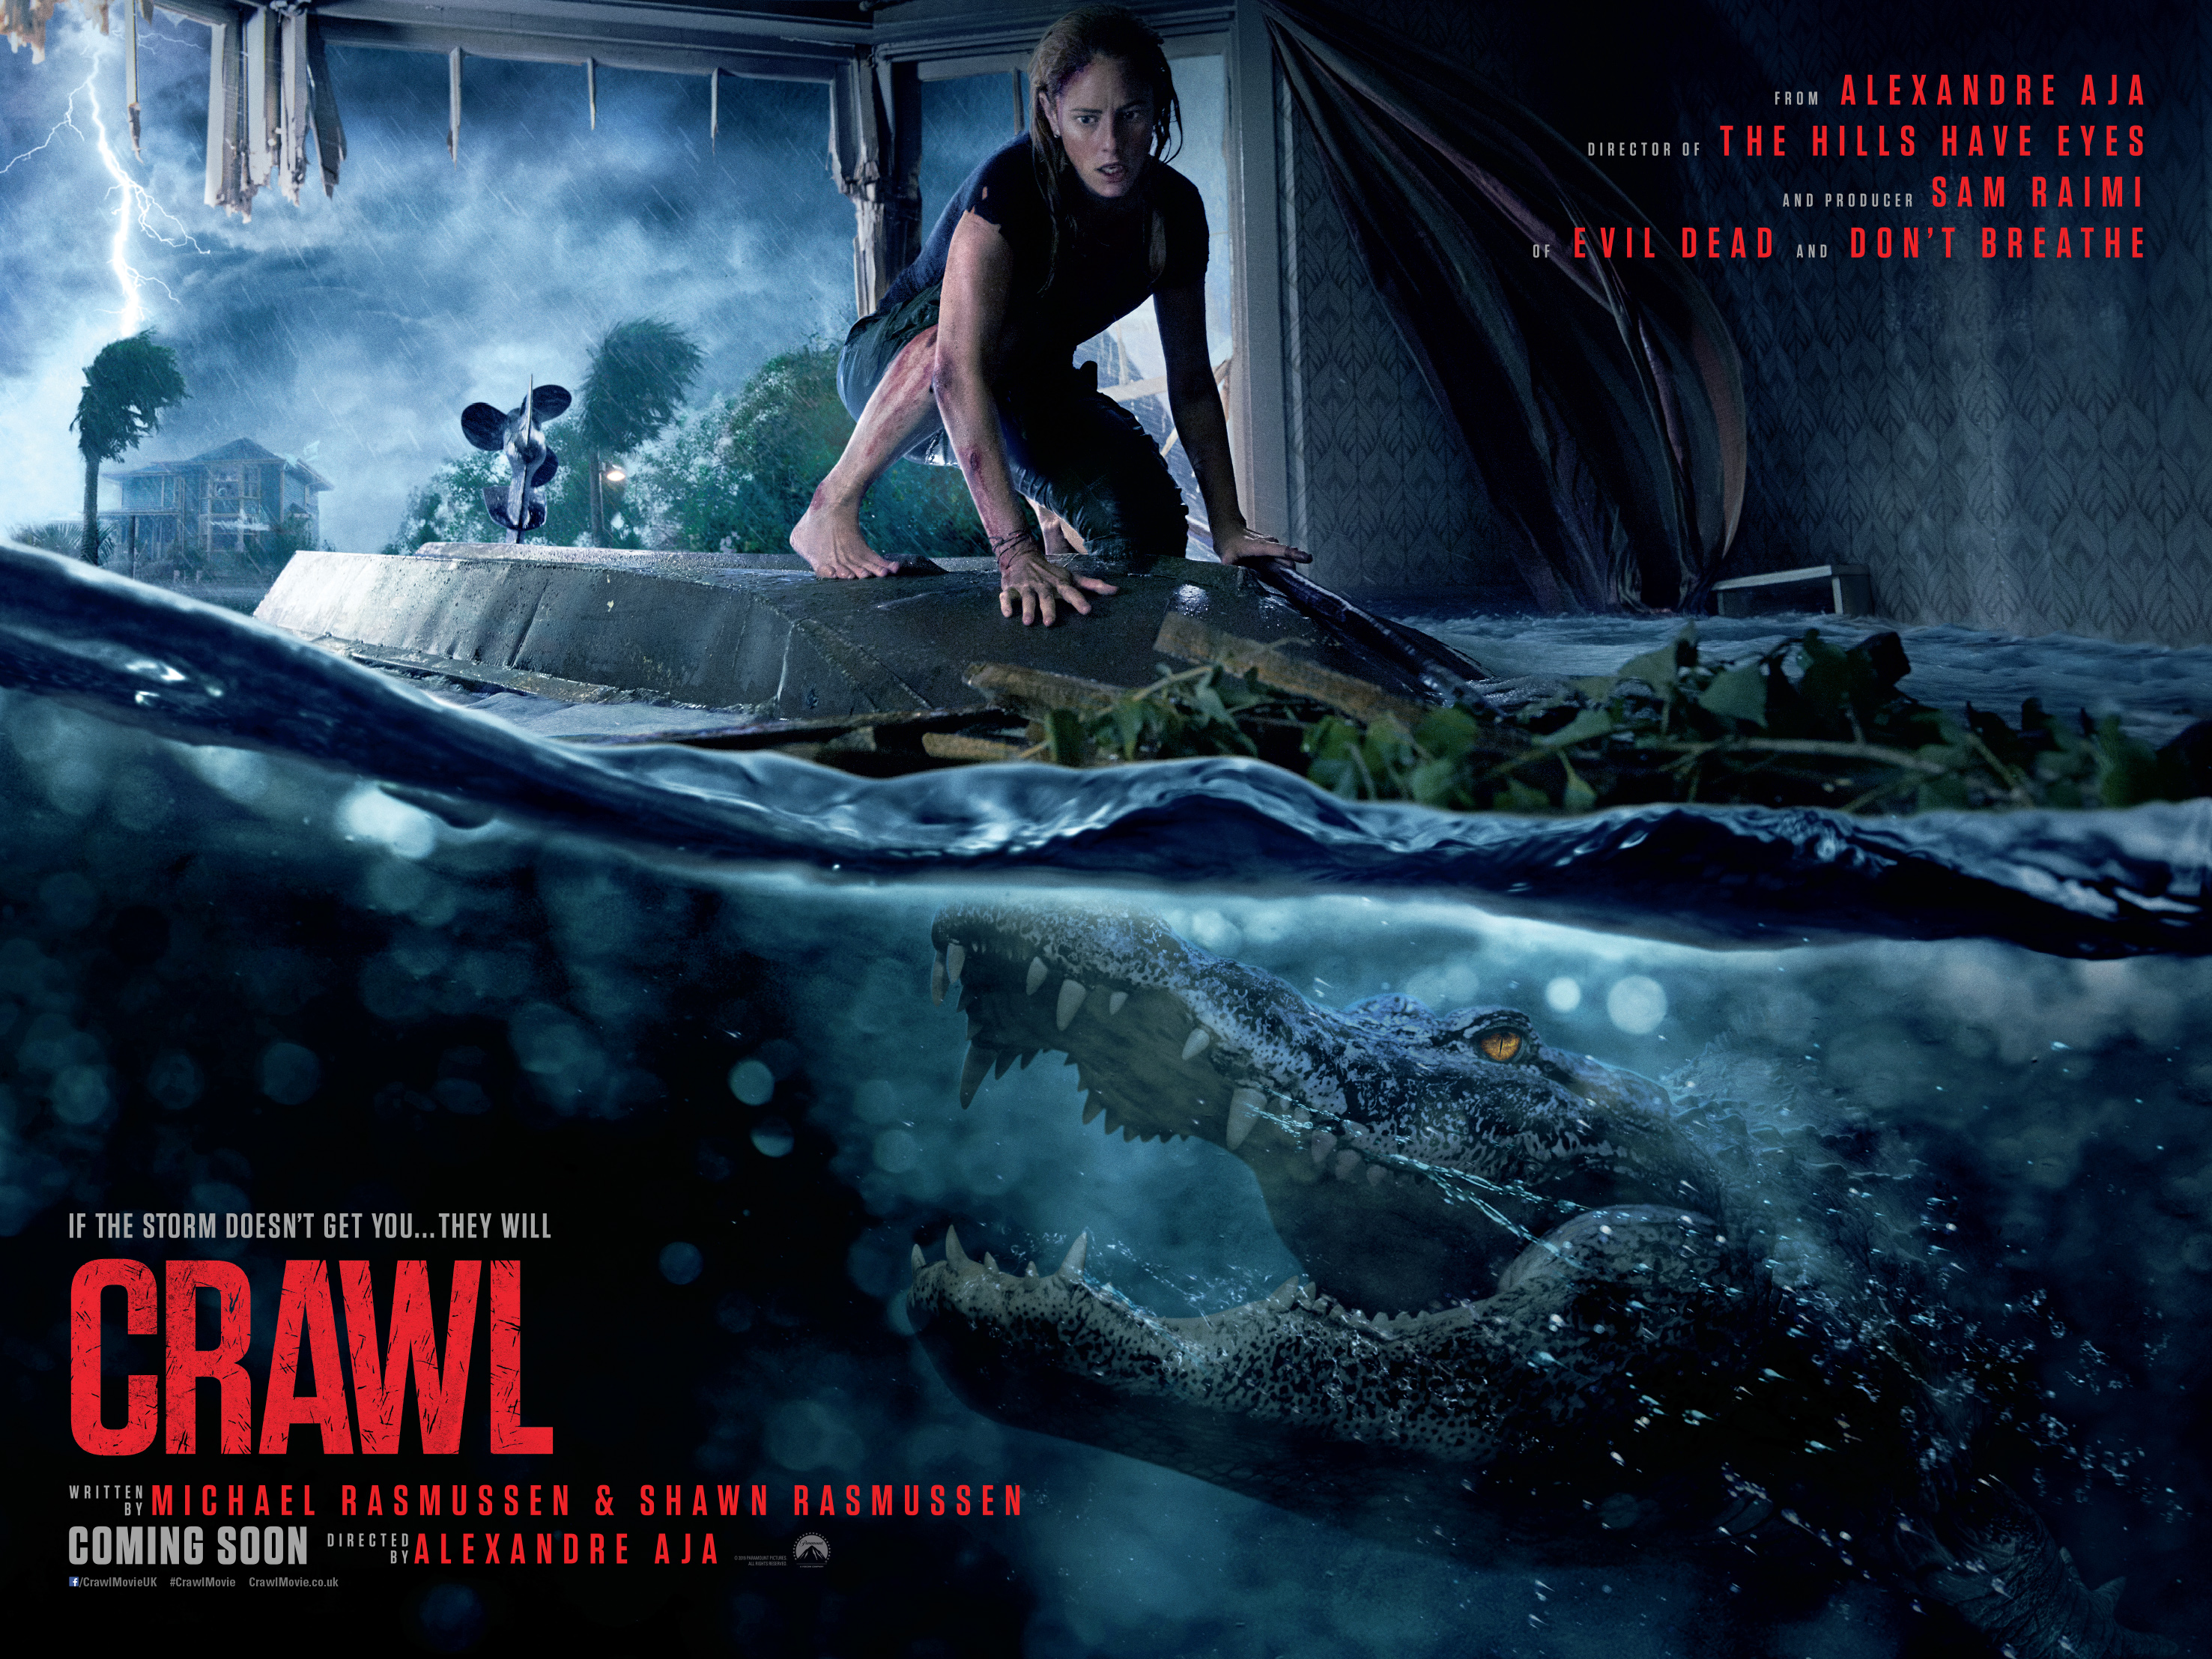 Win tickets to a special 4DX screening of Crawl and Crawl merch with